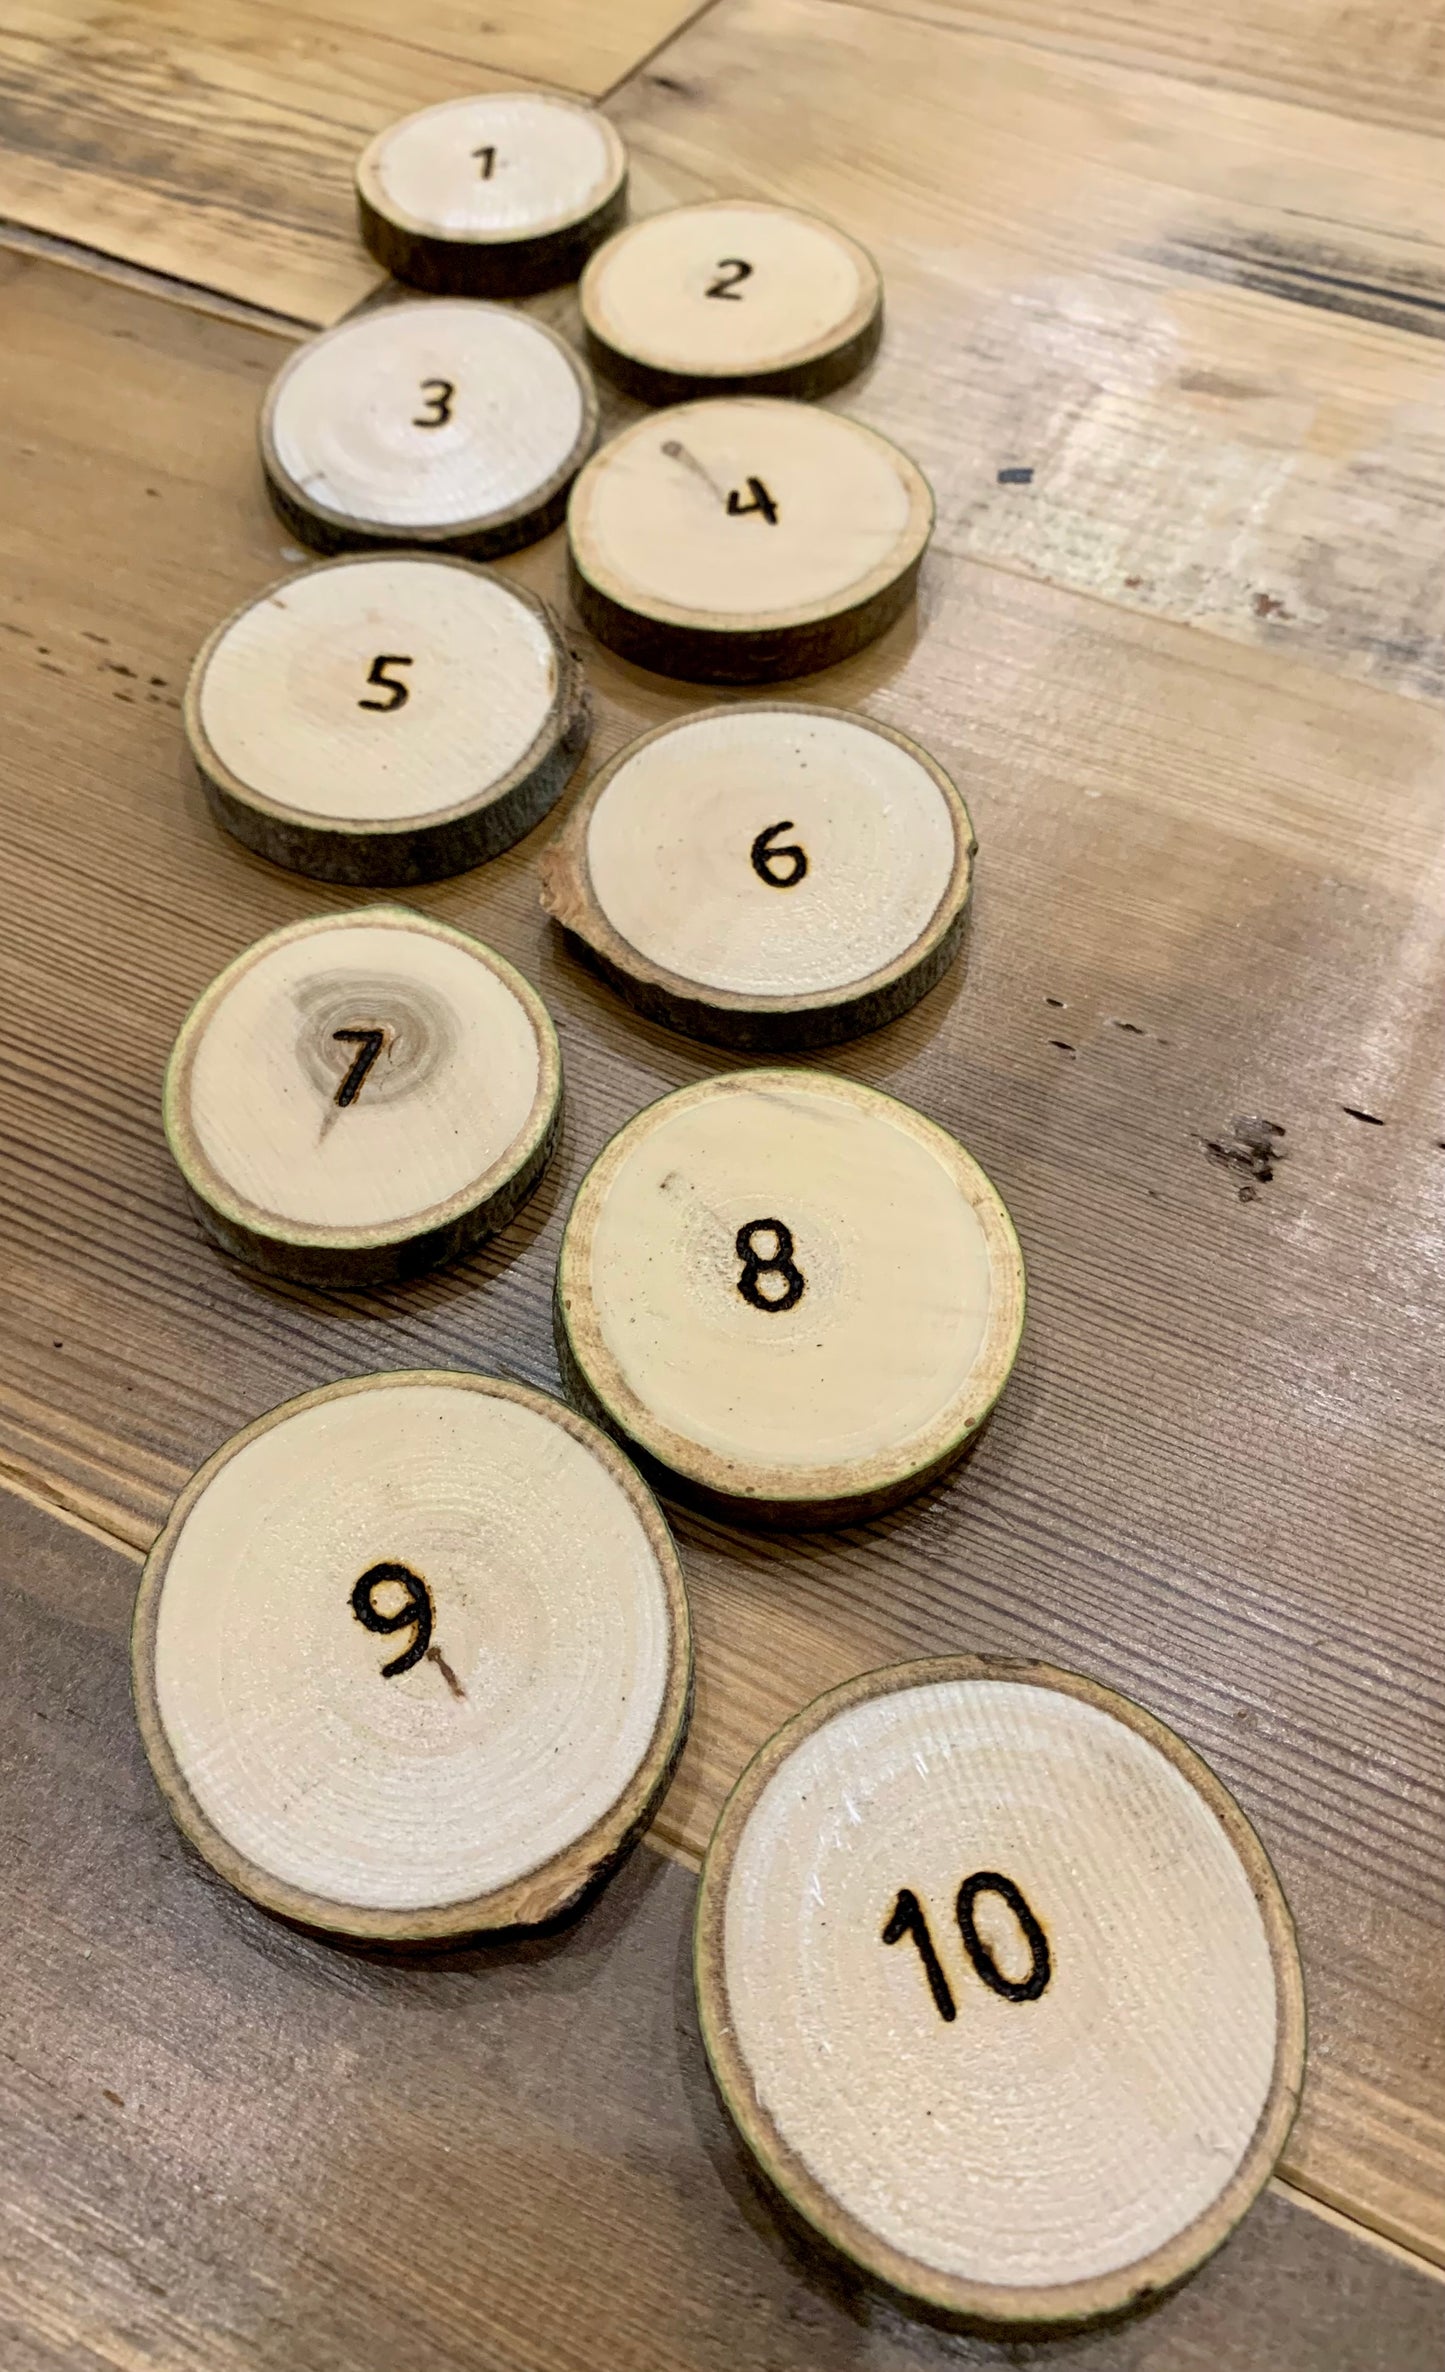 Counting Rounds (1-10)